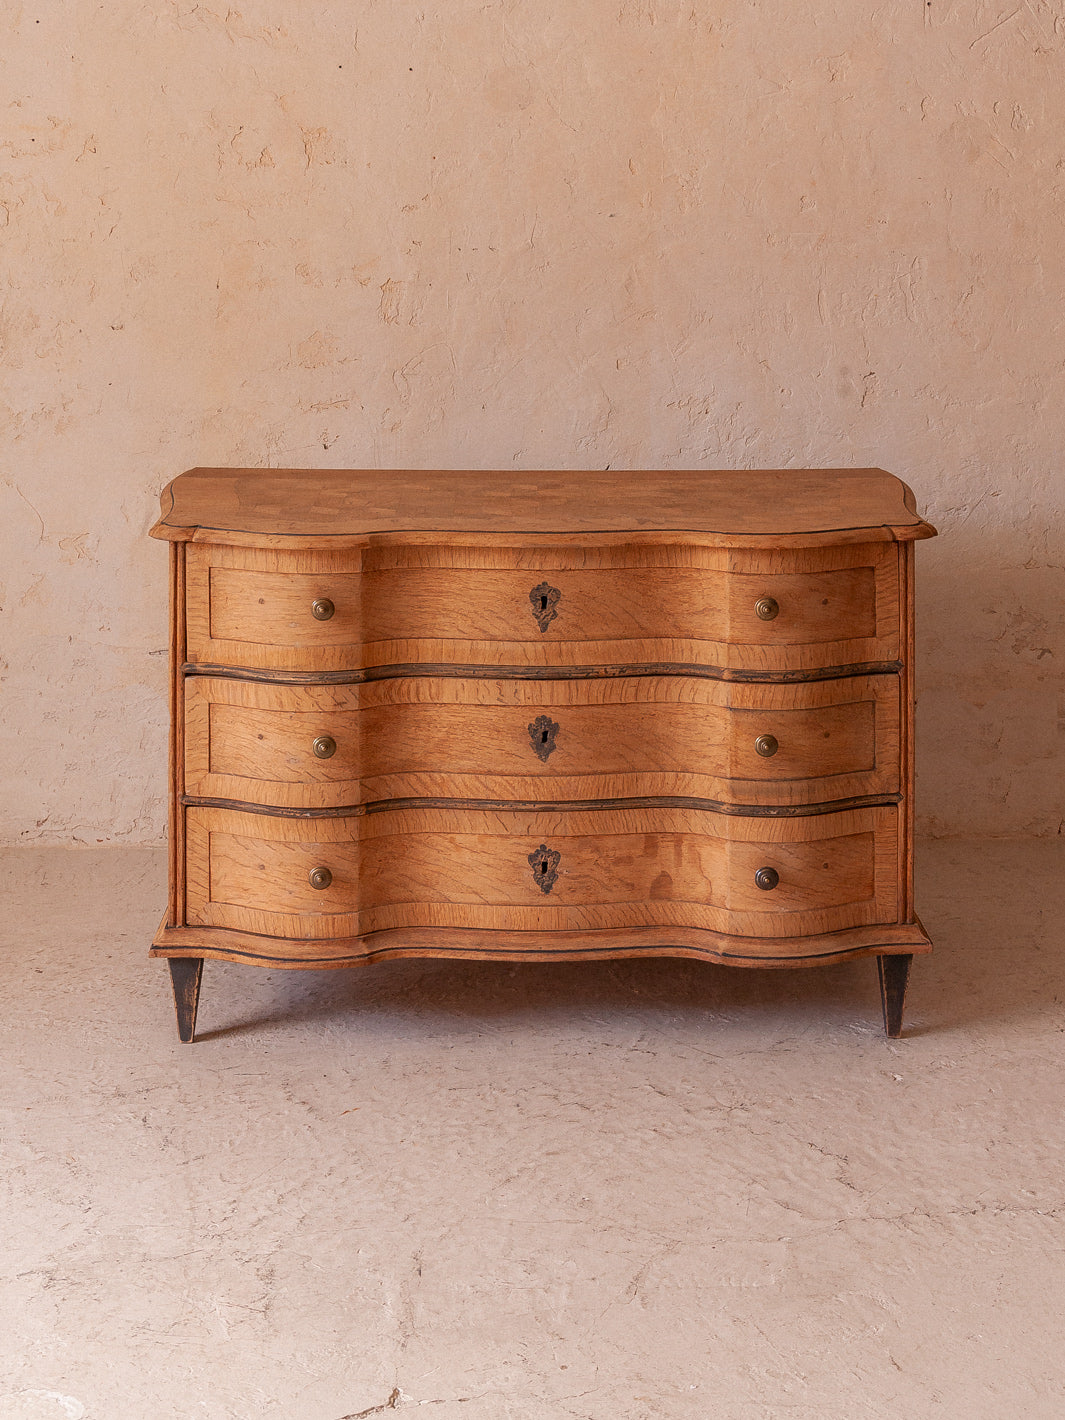 Chest of drawers Germany circa 1770, solid oak